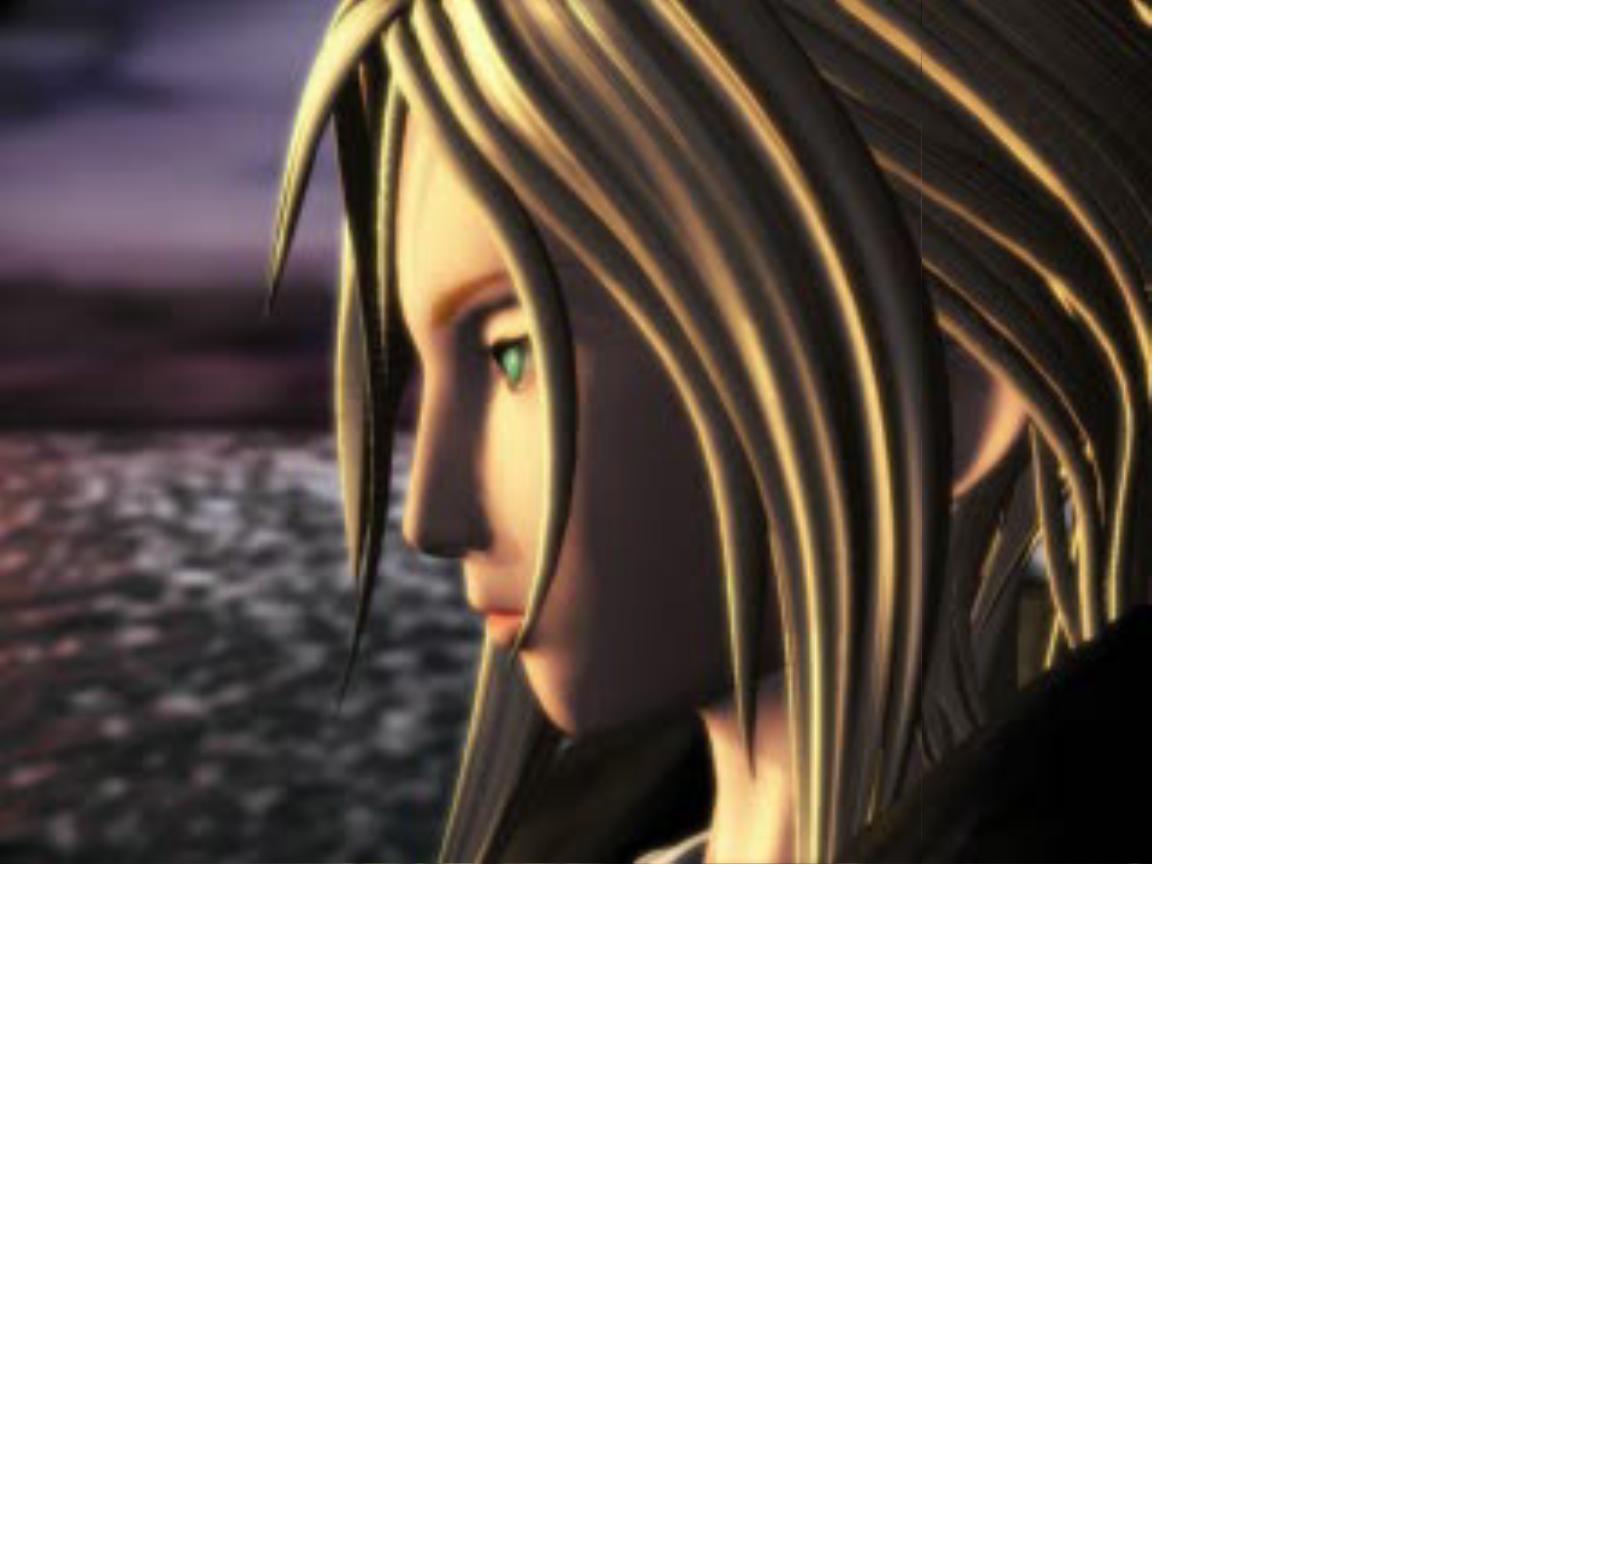 parasite eve iso